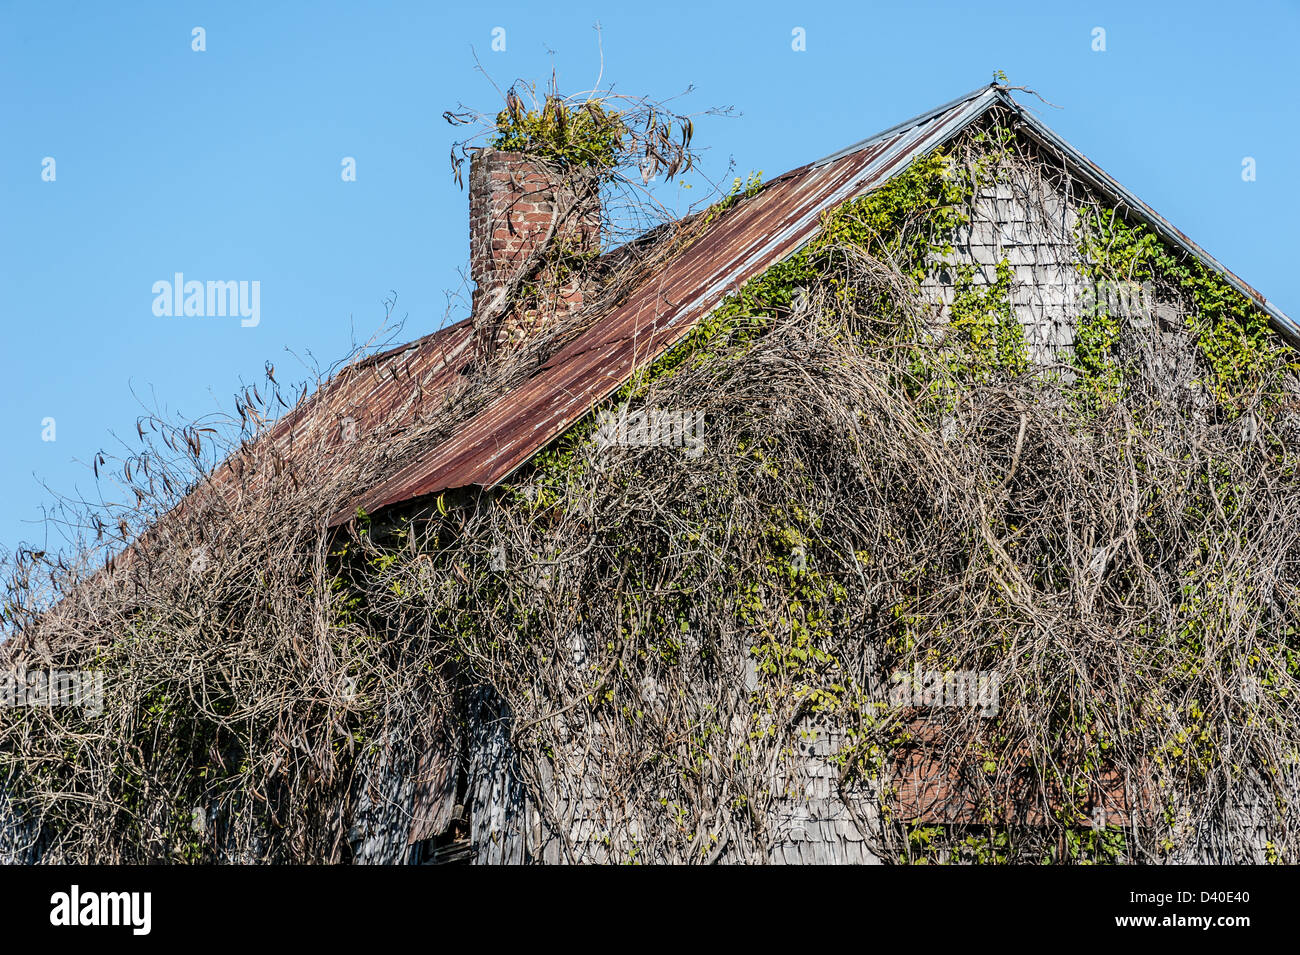 Overgrown abandoned building choked by vines in rural North Georgia, USA. Stock Photo